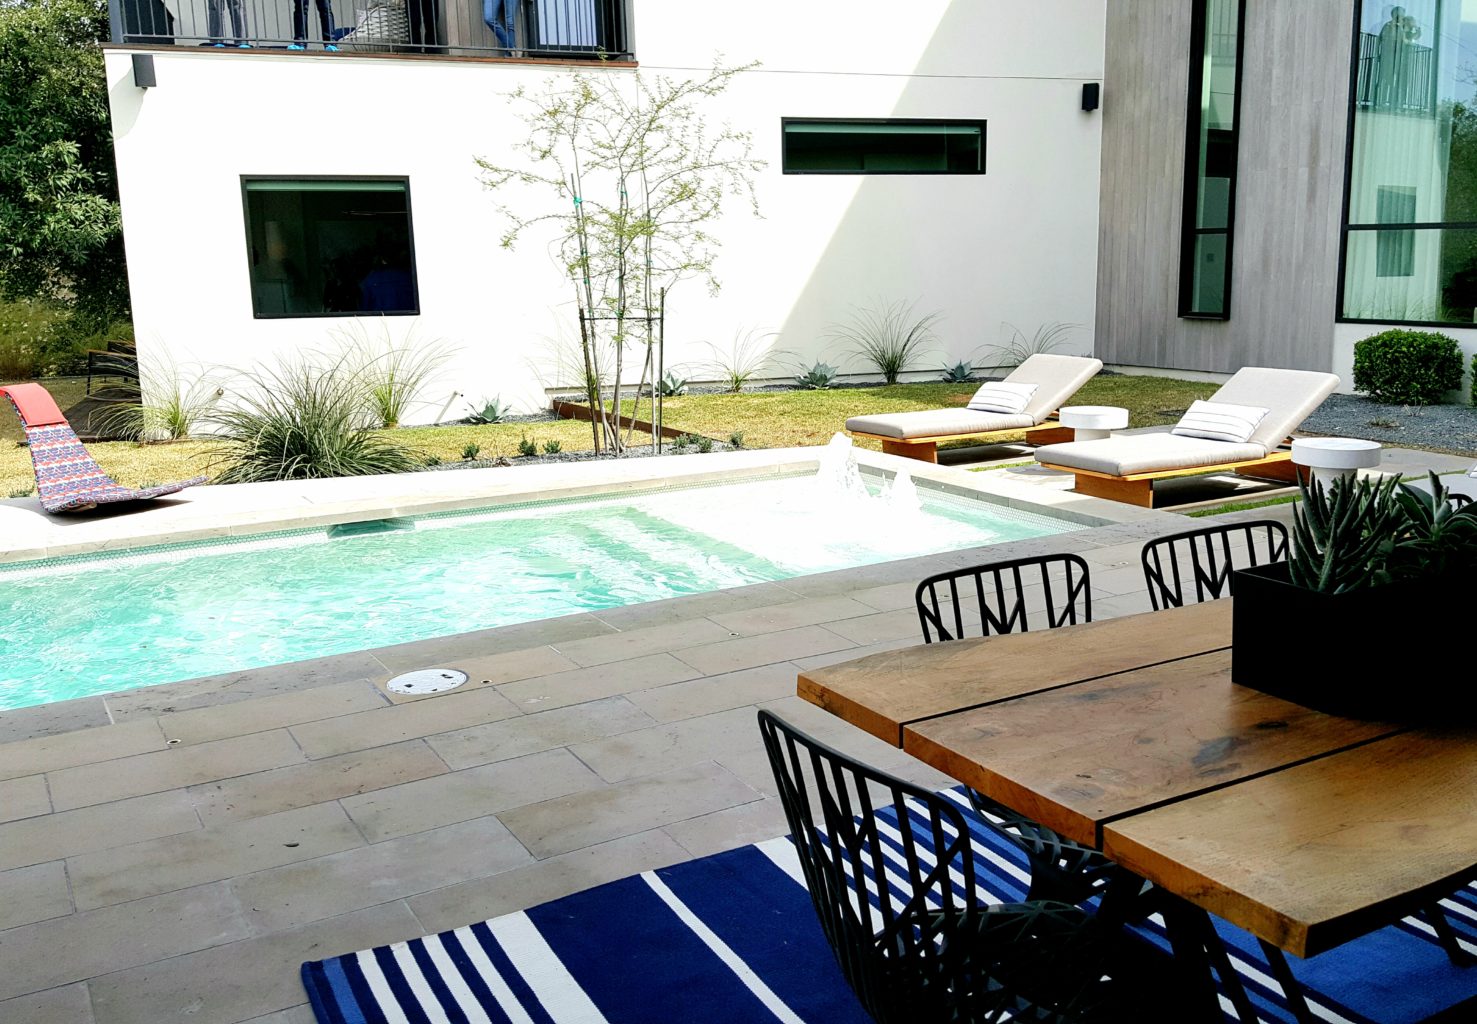 pools and patios on the 2019 Austin Modern Home Tour. Details on the Pillow Goddess Blog.